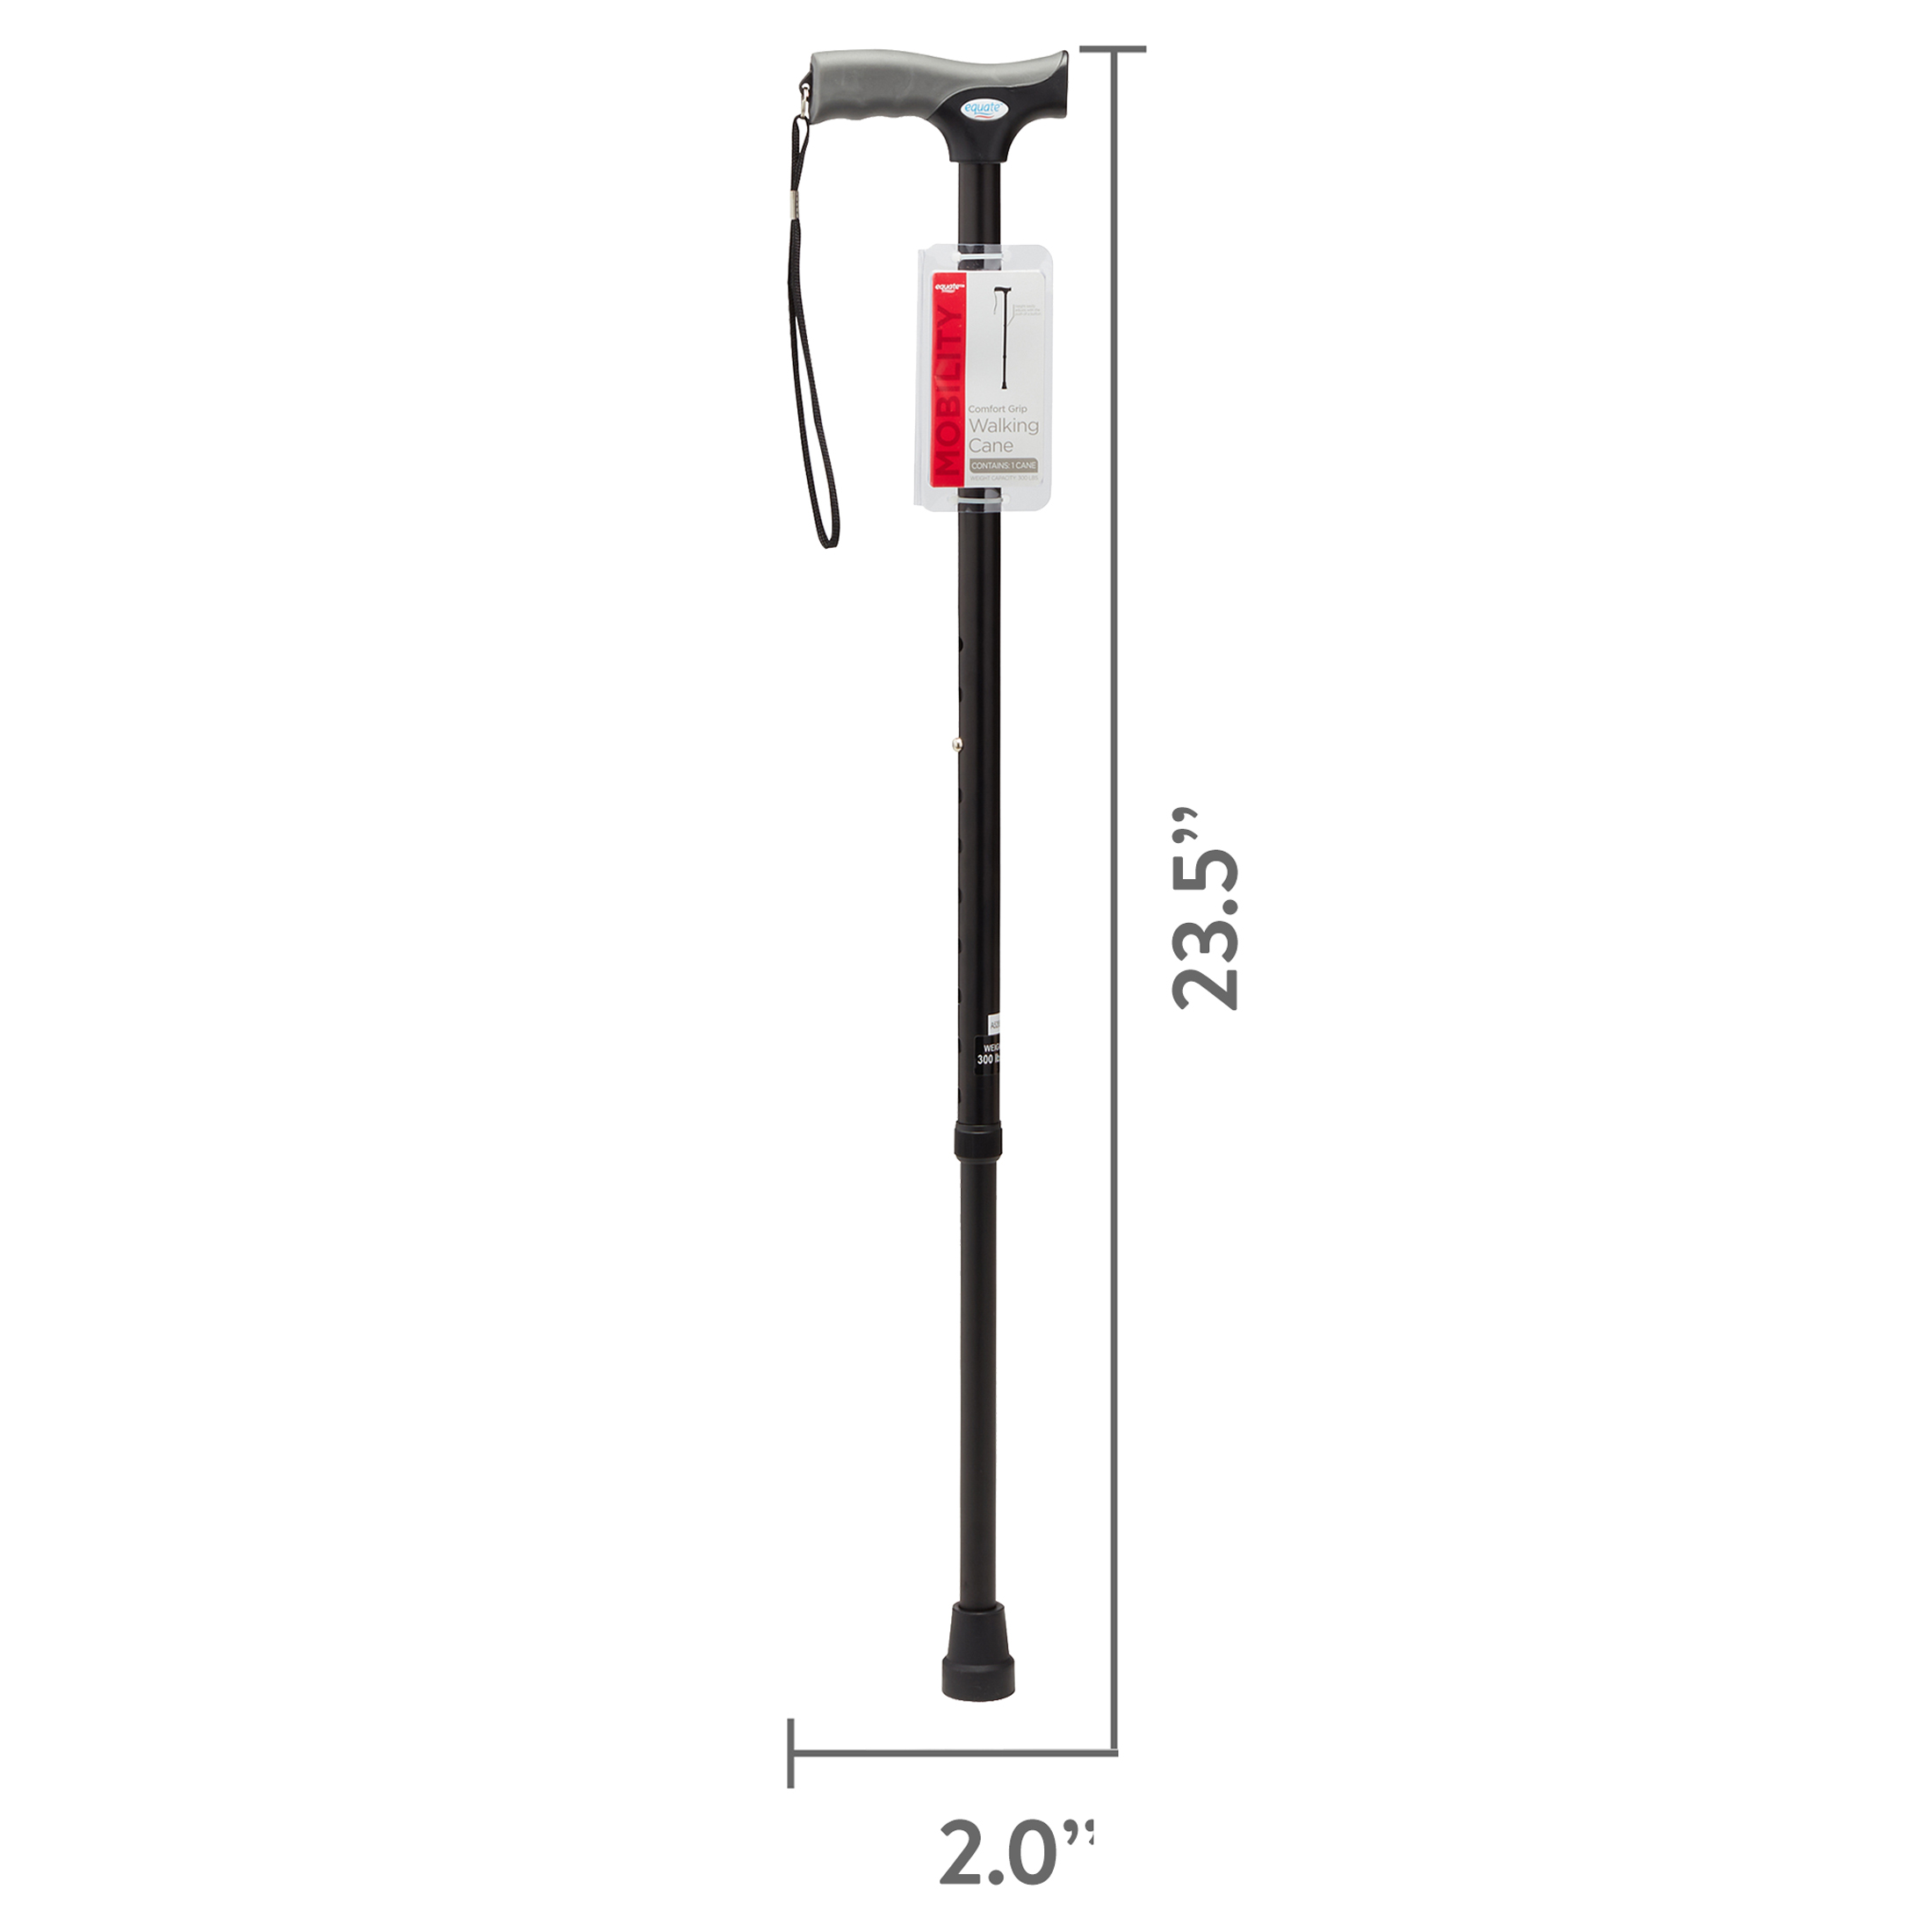 Equate Comfort Grip Walking Cane for All Occasions, Adjustable, Wrist Strap, Black, 300 lb Capacity - image 4 of 8